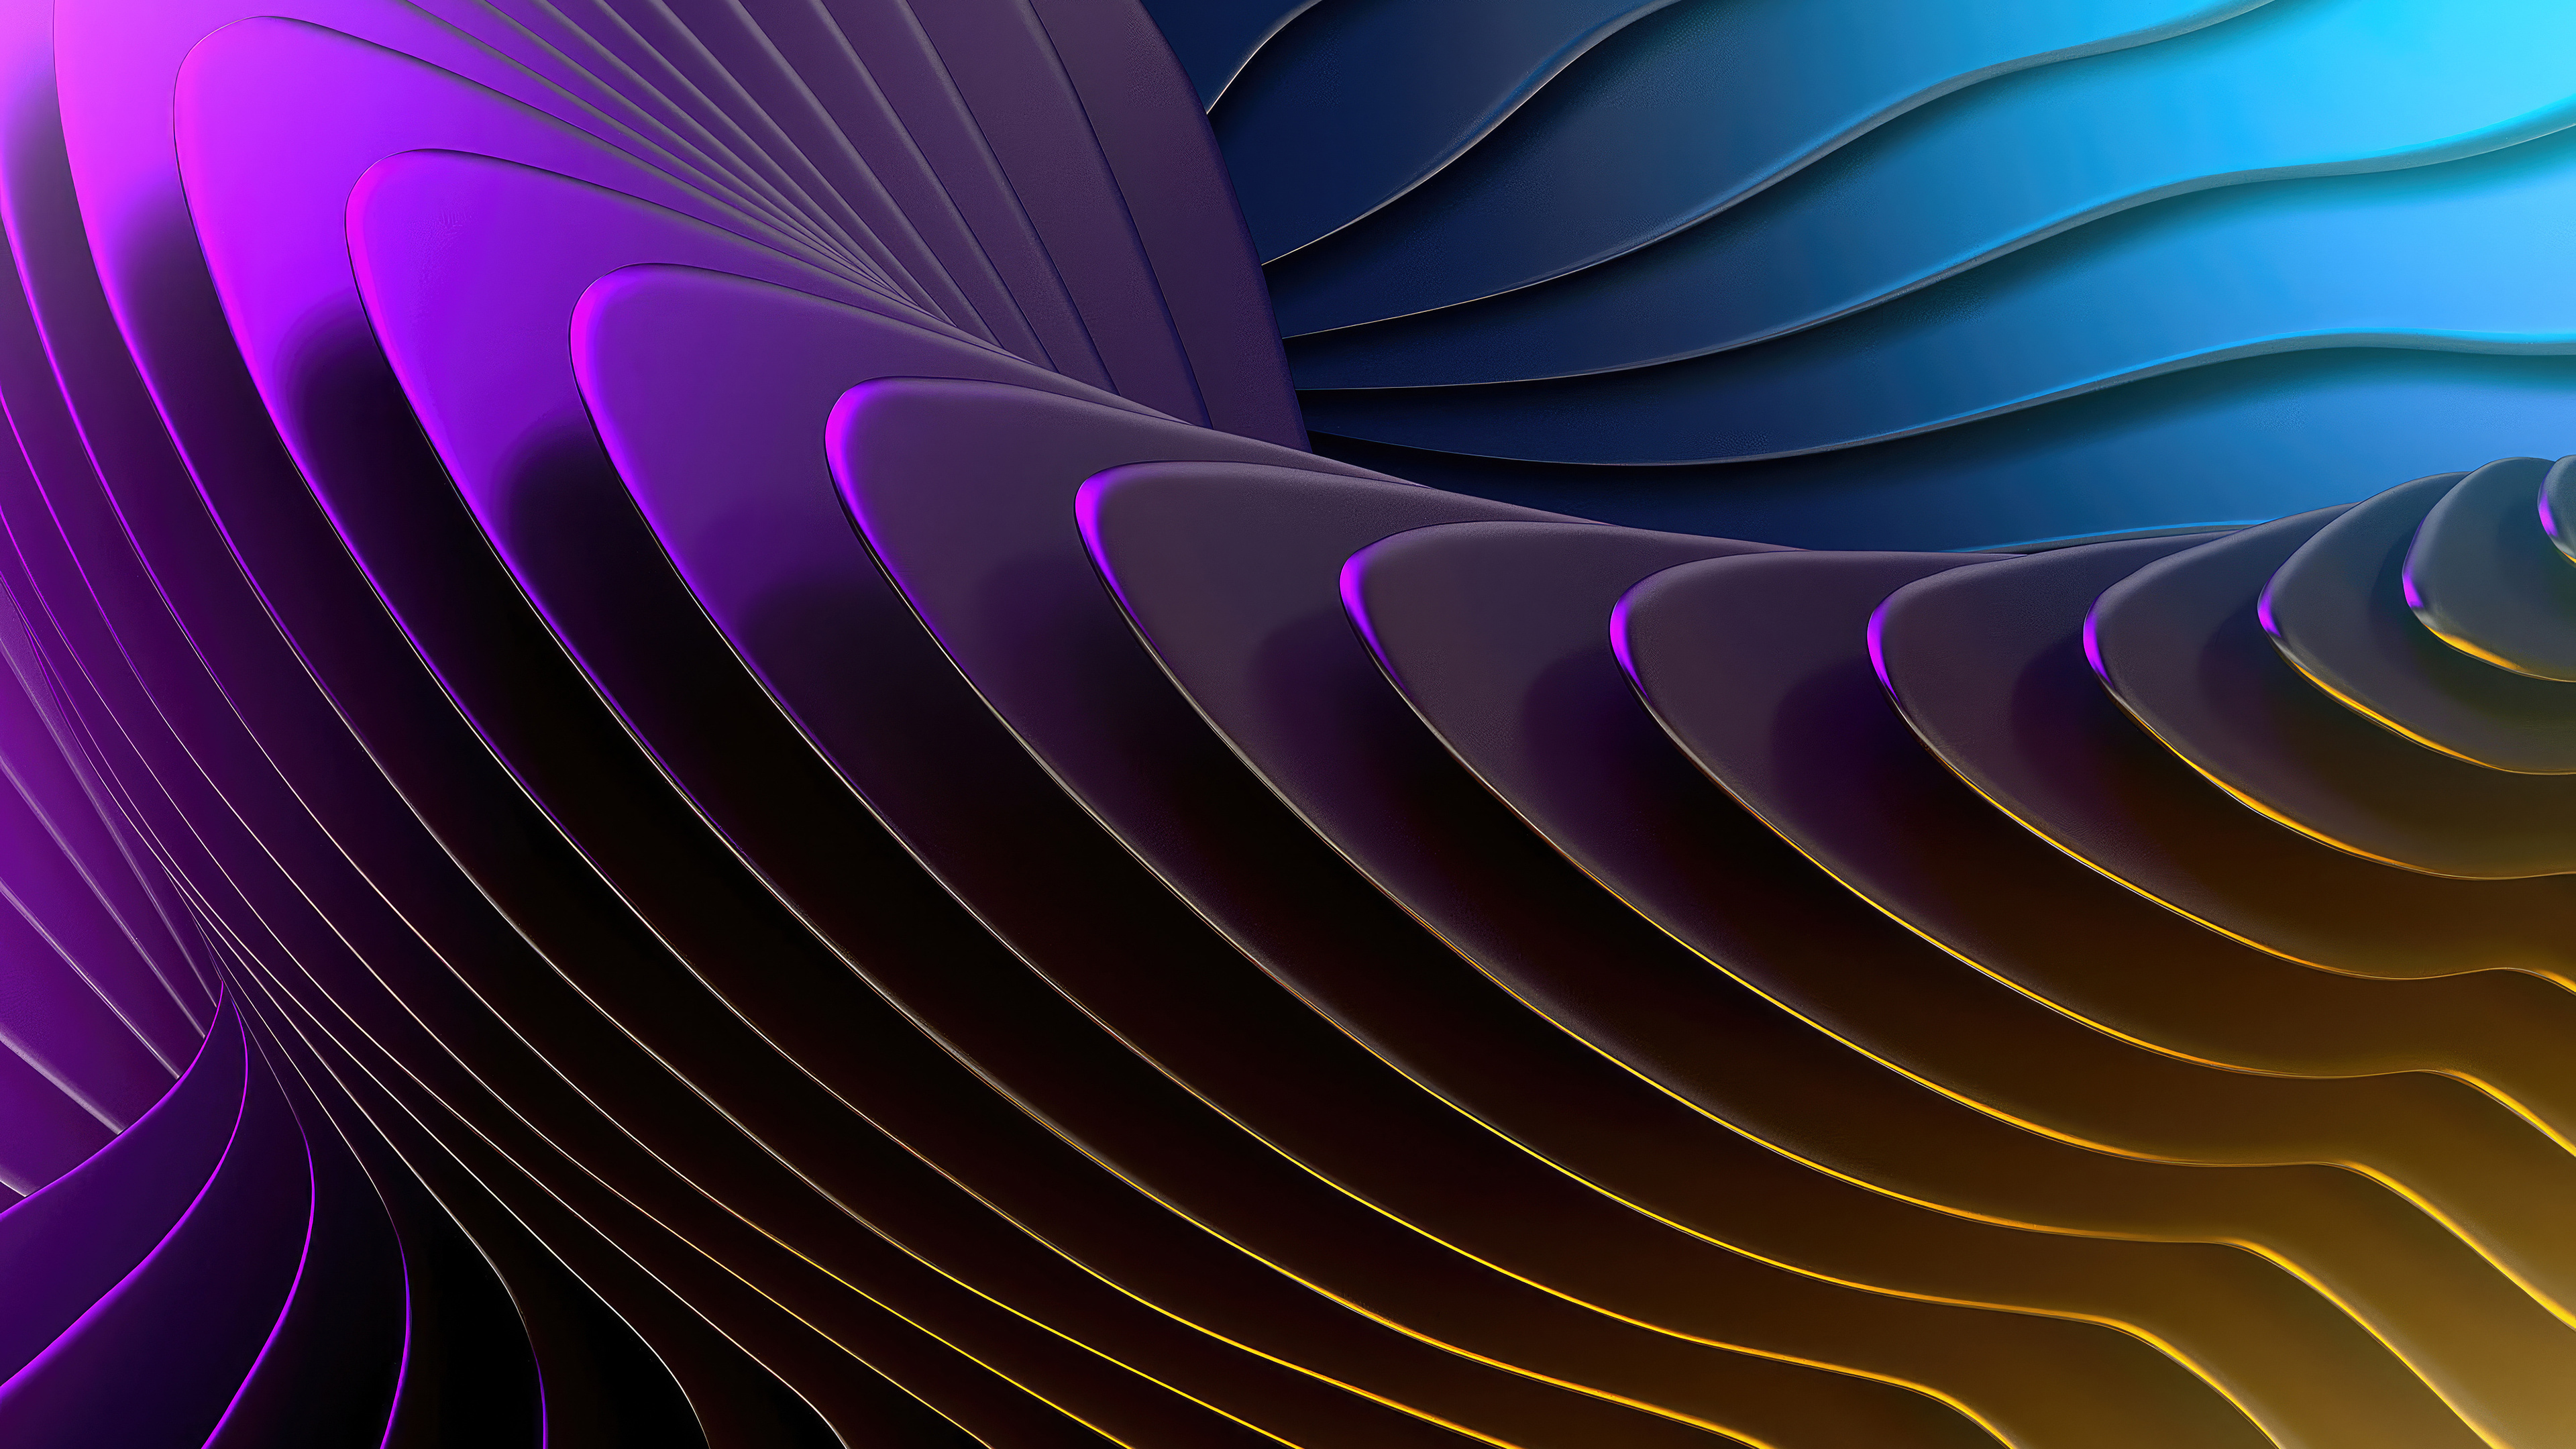 Layers like patterns, abstract, 3840x2160 wallpaper